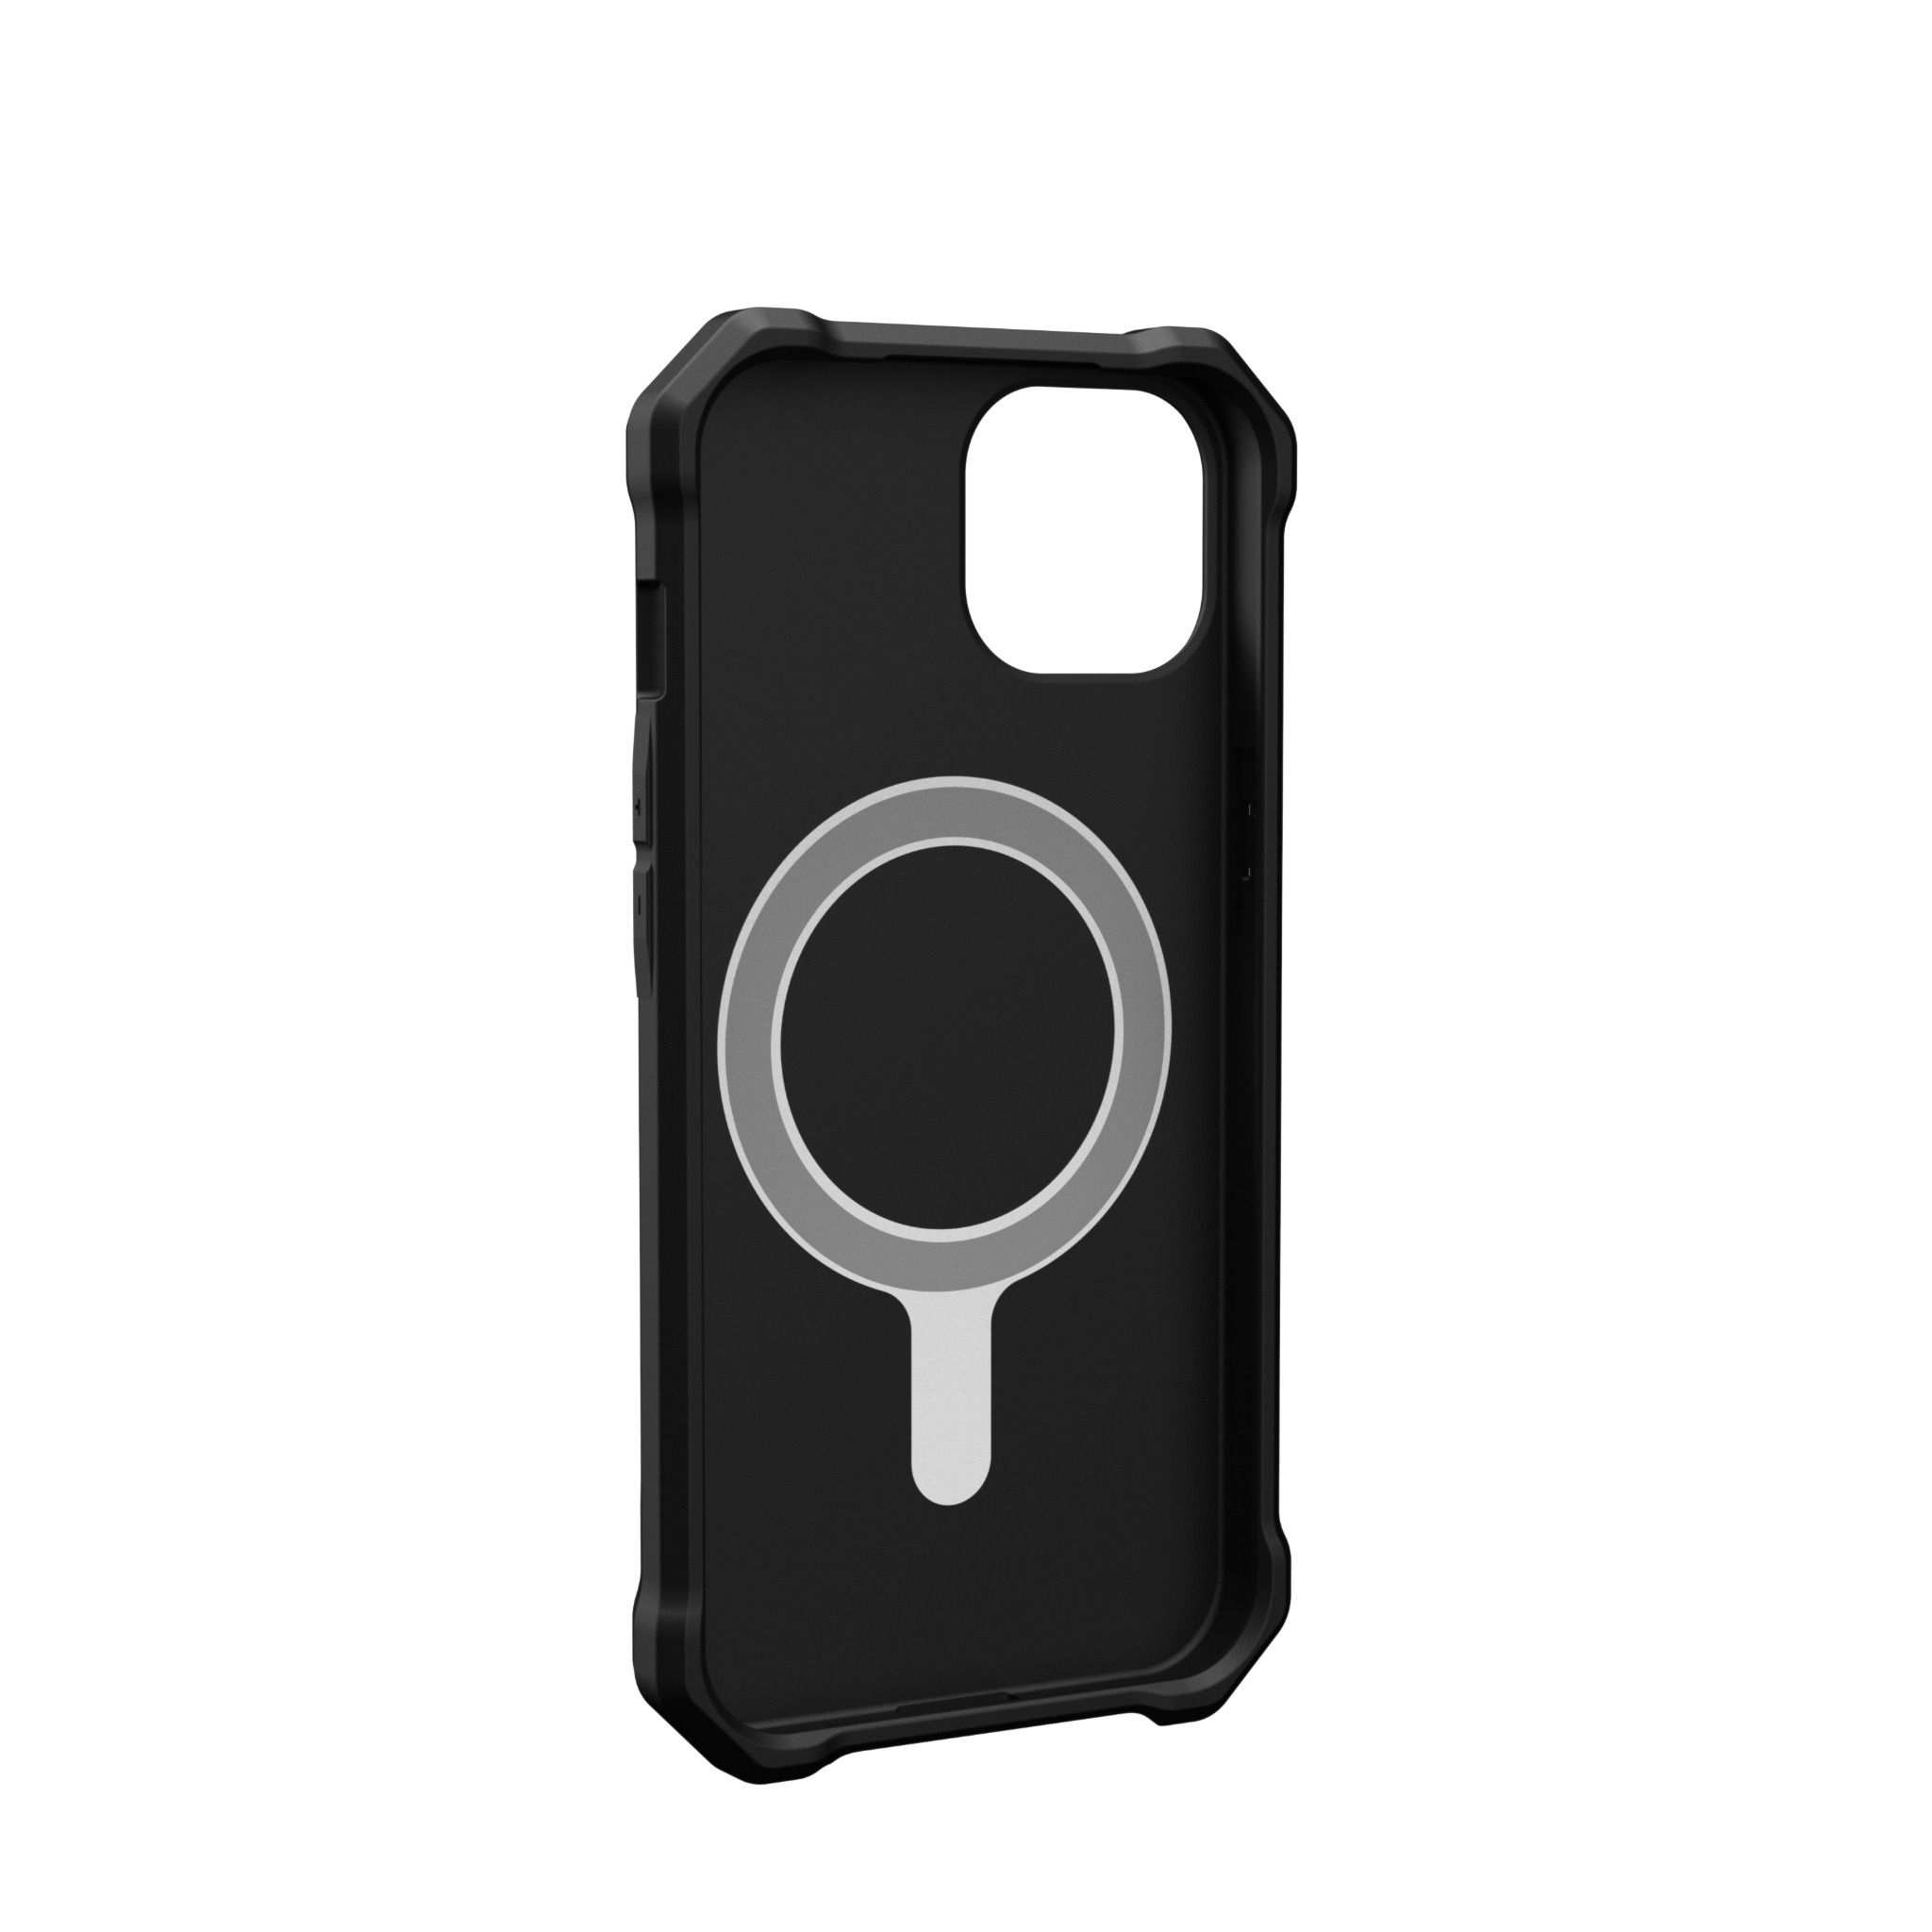  Ốp lưng Essential Armor w MagSafe cho iPhone 13 [6.1 inch] 